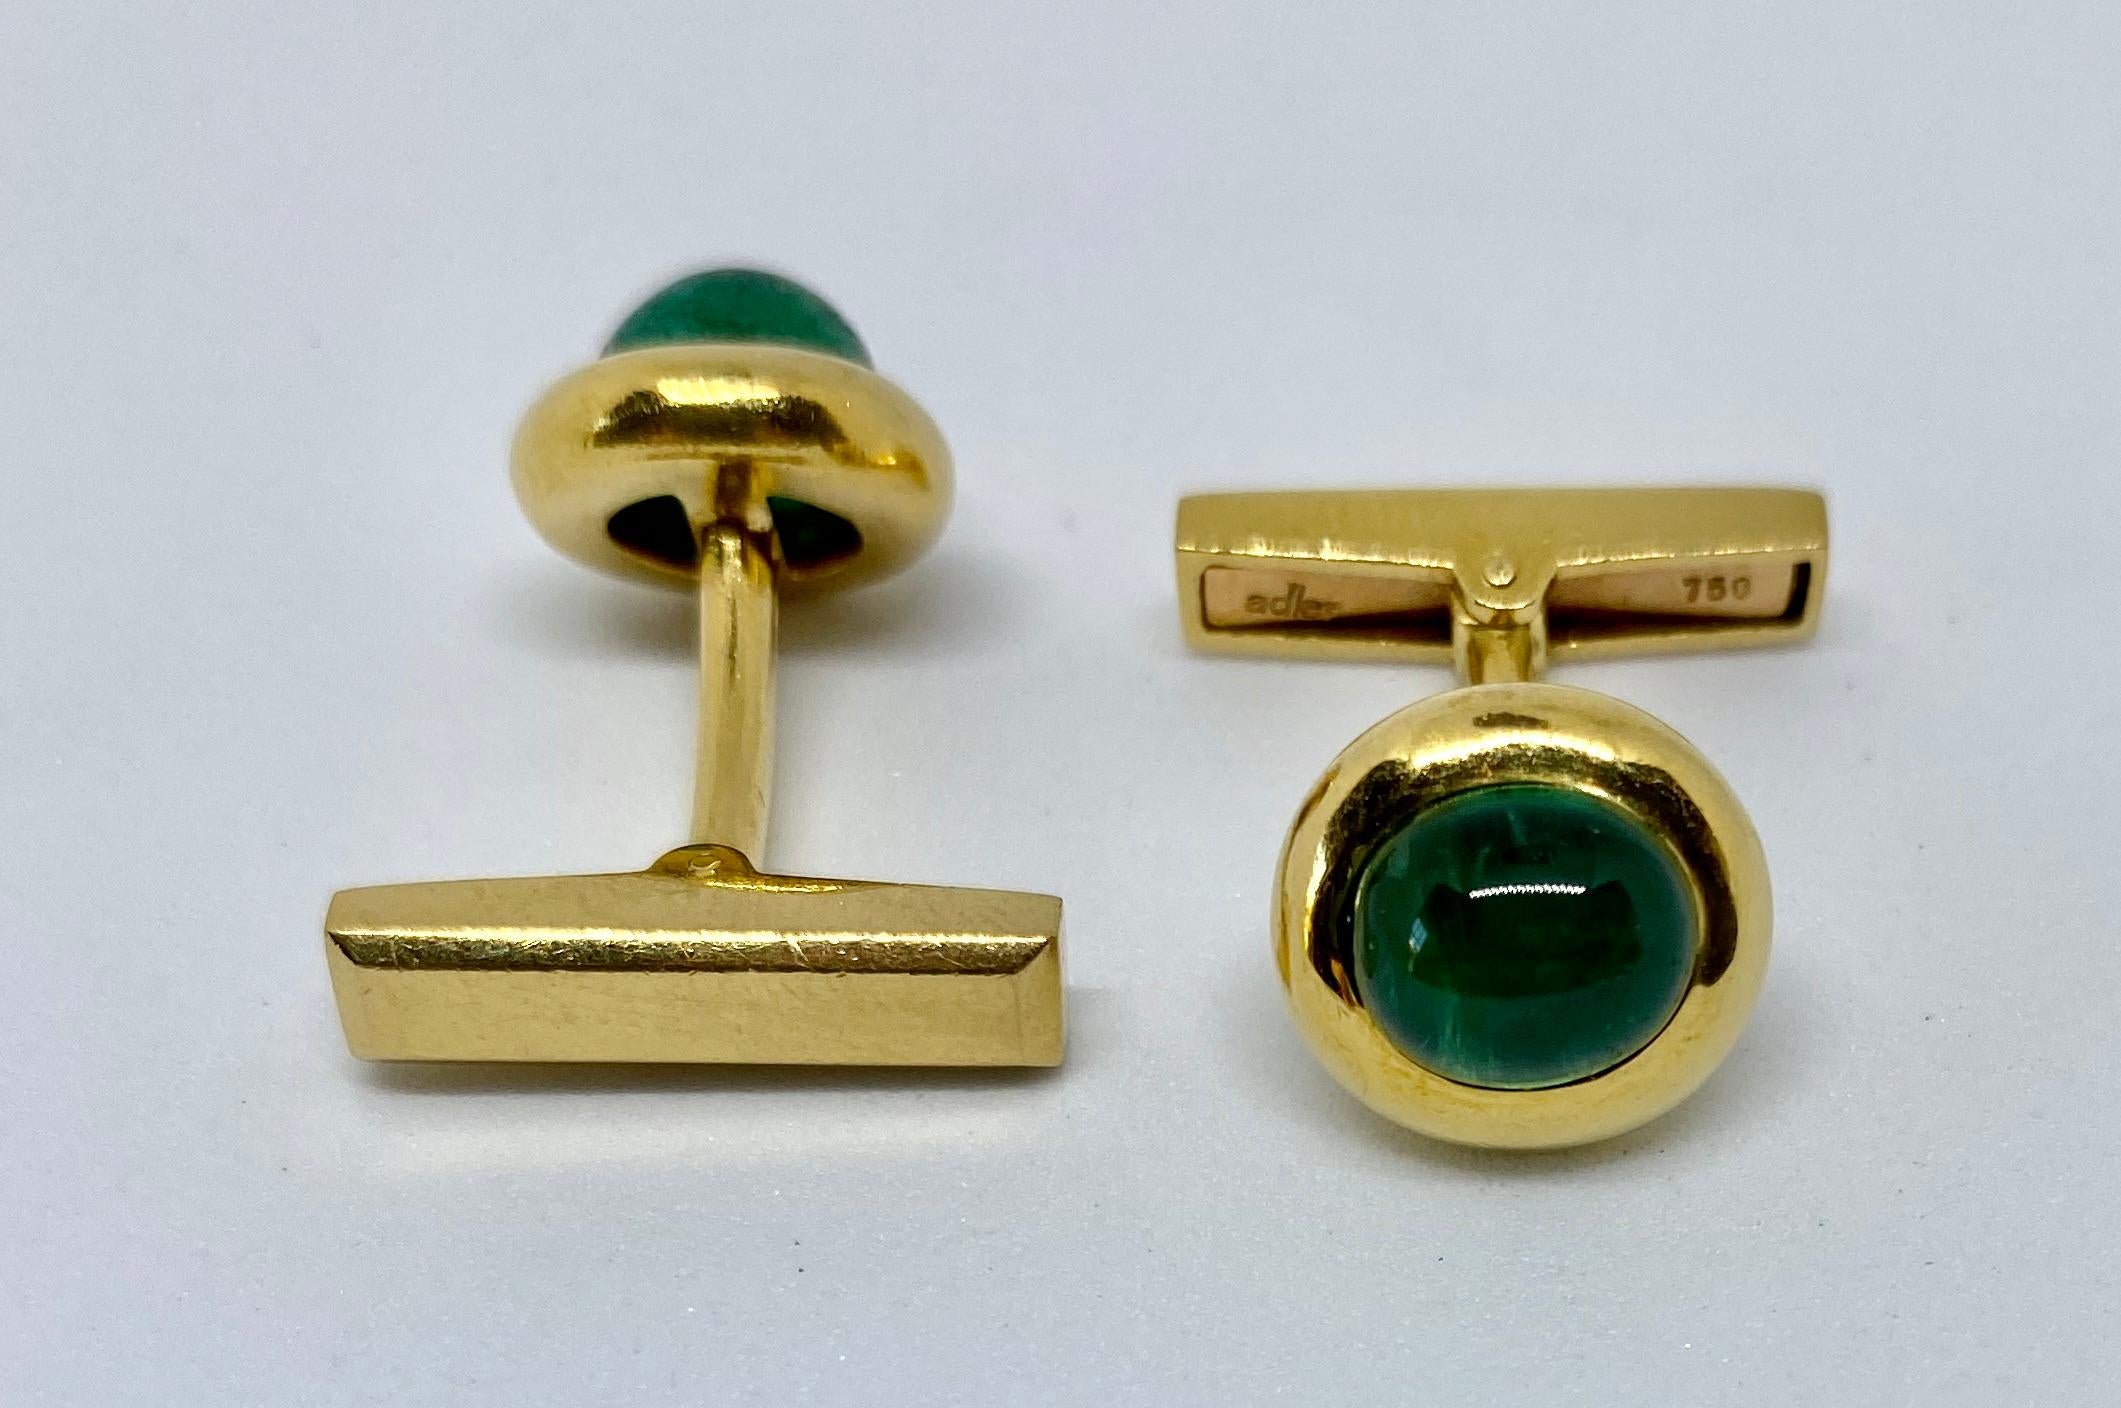 Established in the 19th Century and best known for its use of the finest gemstones, the Geneva-based Maison Adler produced these tasteful cufflinks featuring two luminous, cabochon-cut emeralds set in heavy, 18K yellow gold. The natural emerald